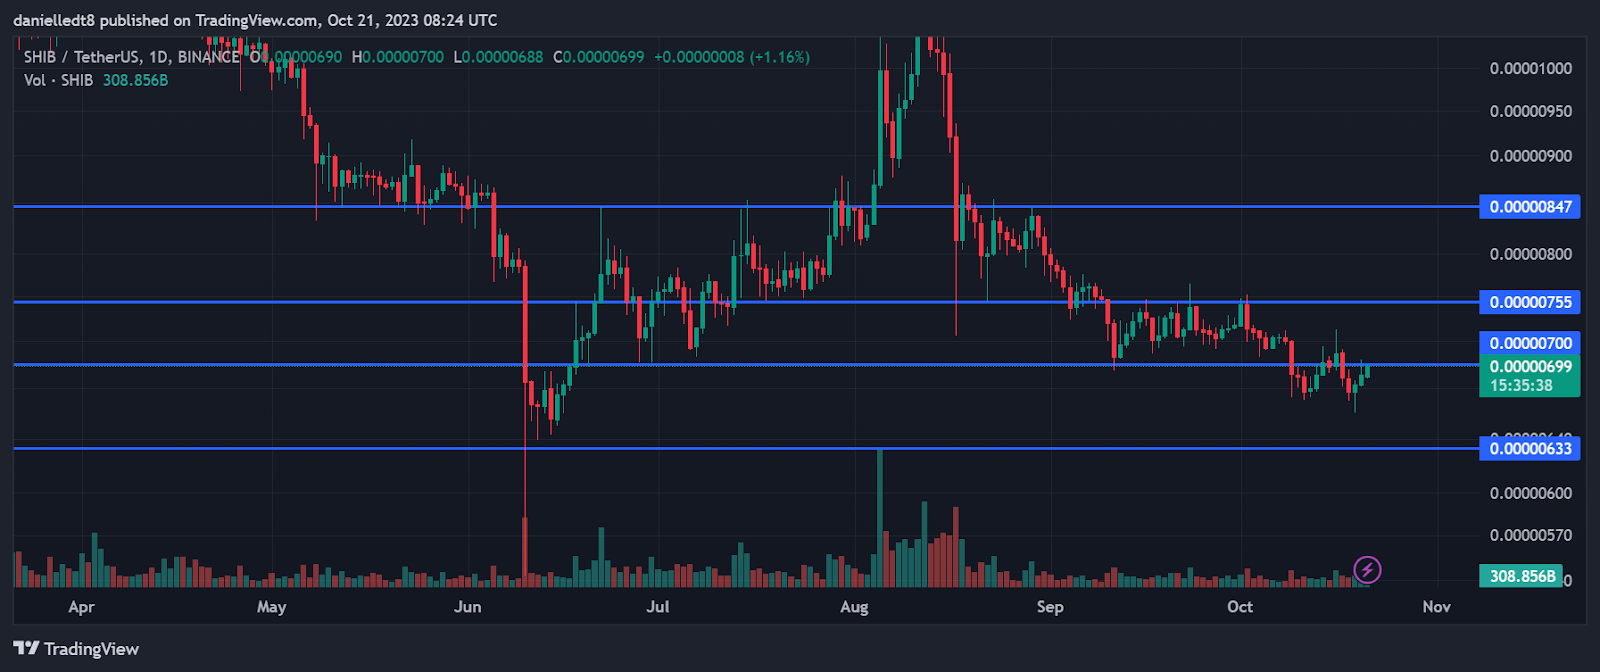 Daily chart for SHIB/USDT (Source: TradingView)